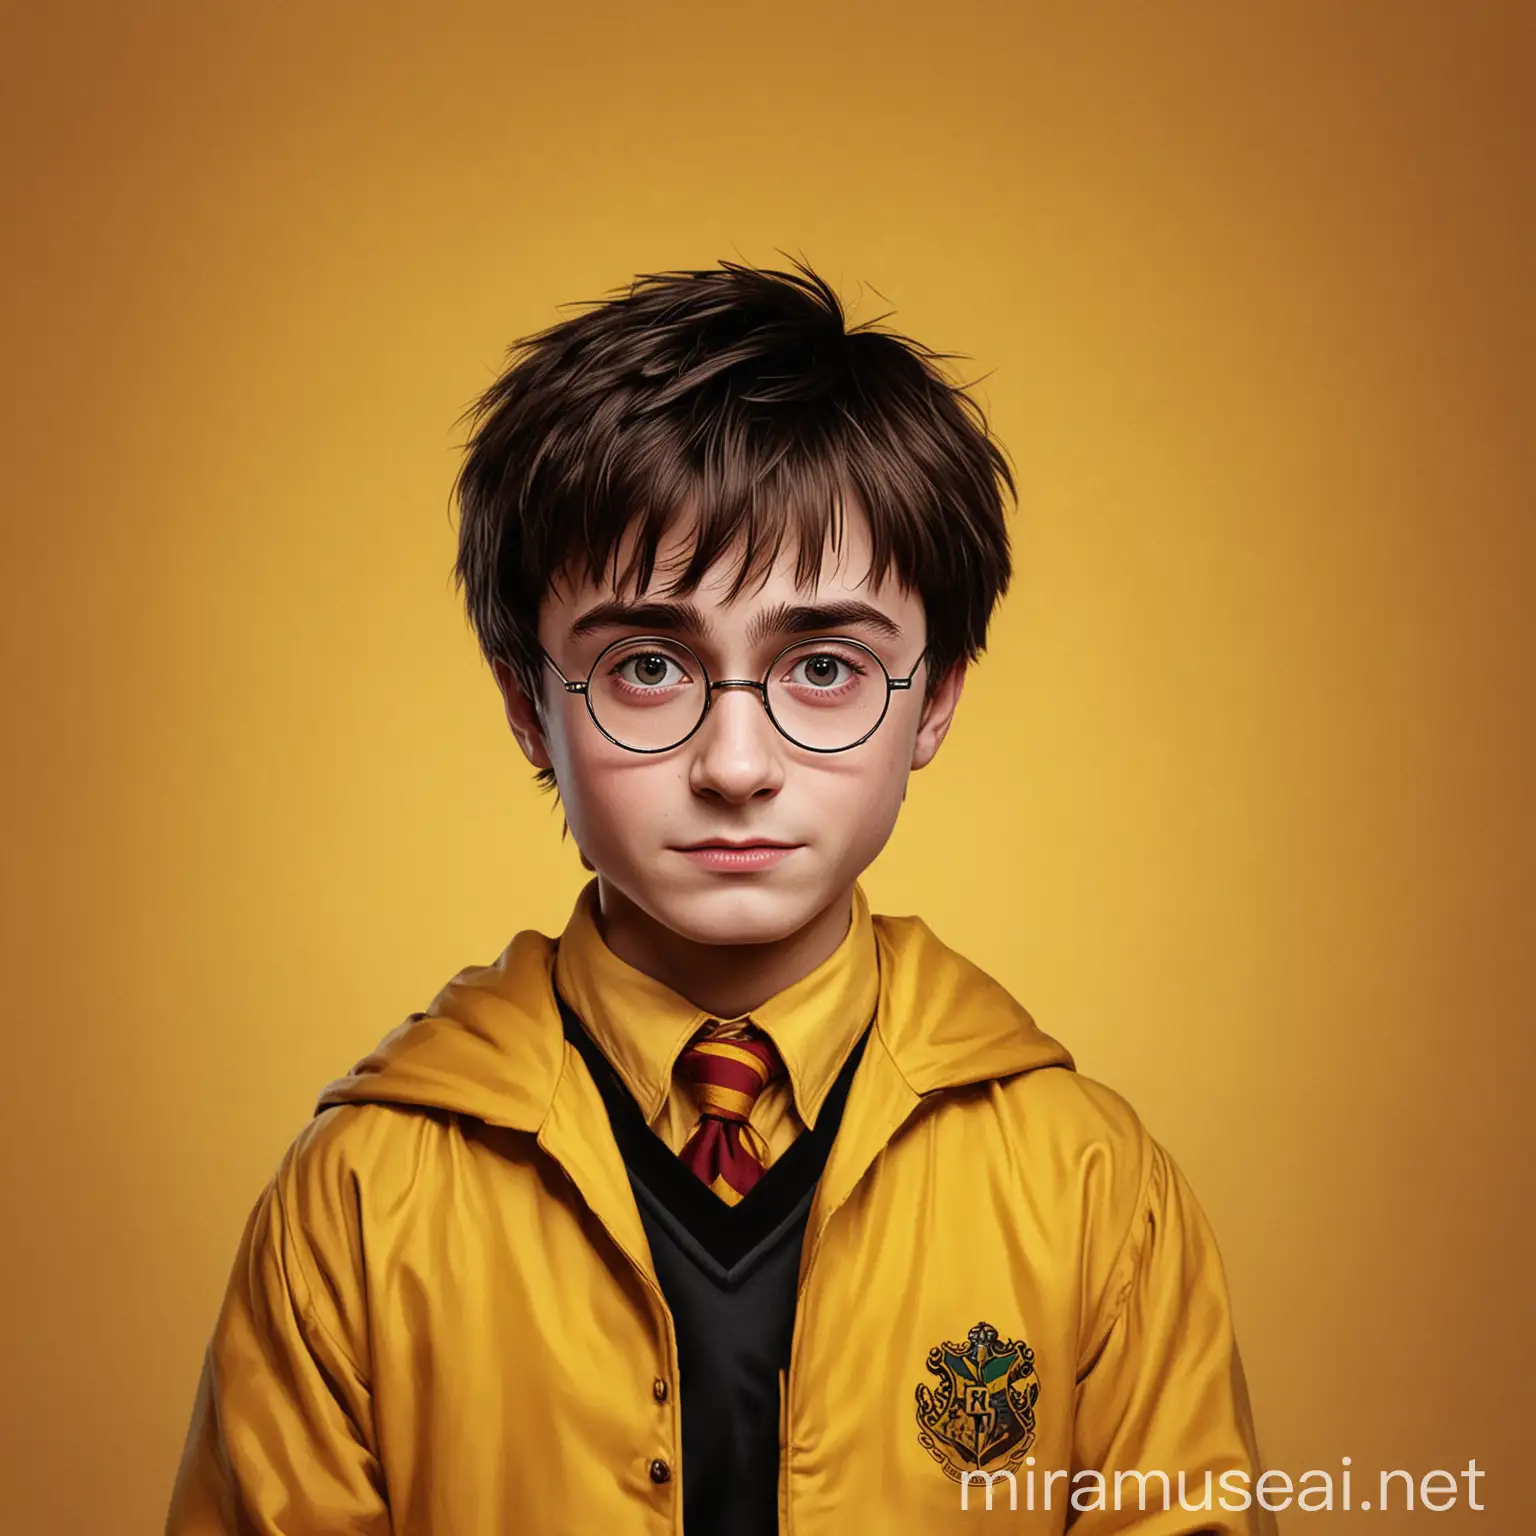 harry potter 
yellow background